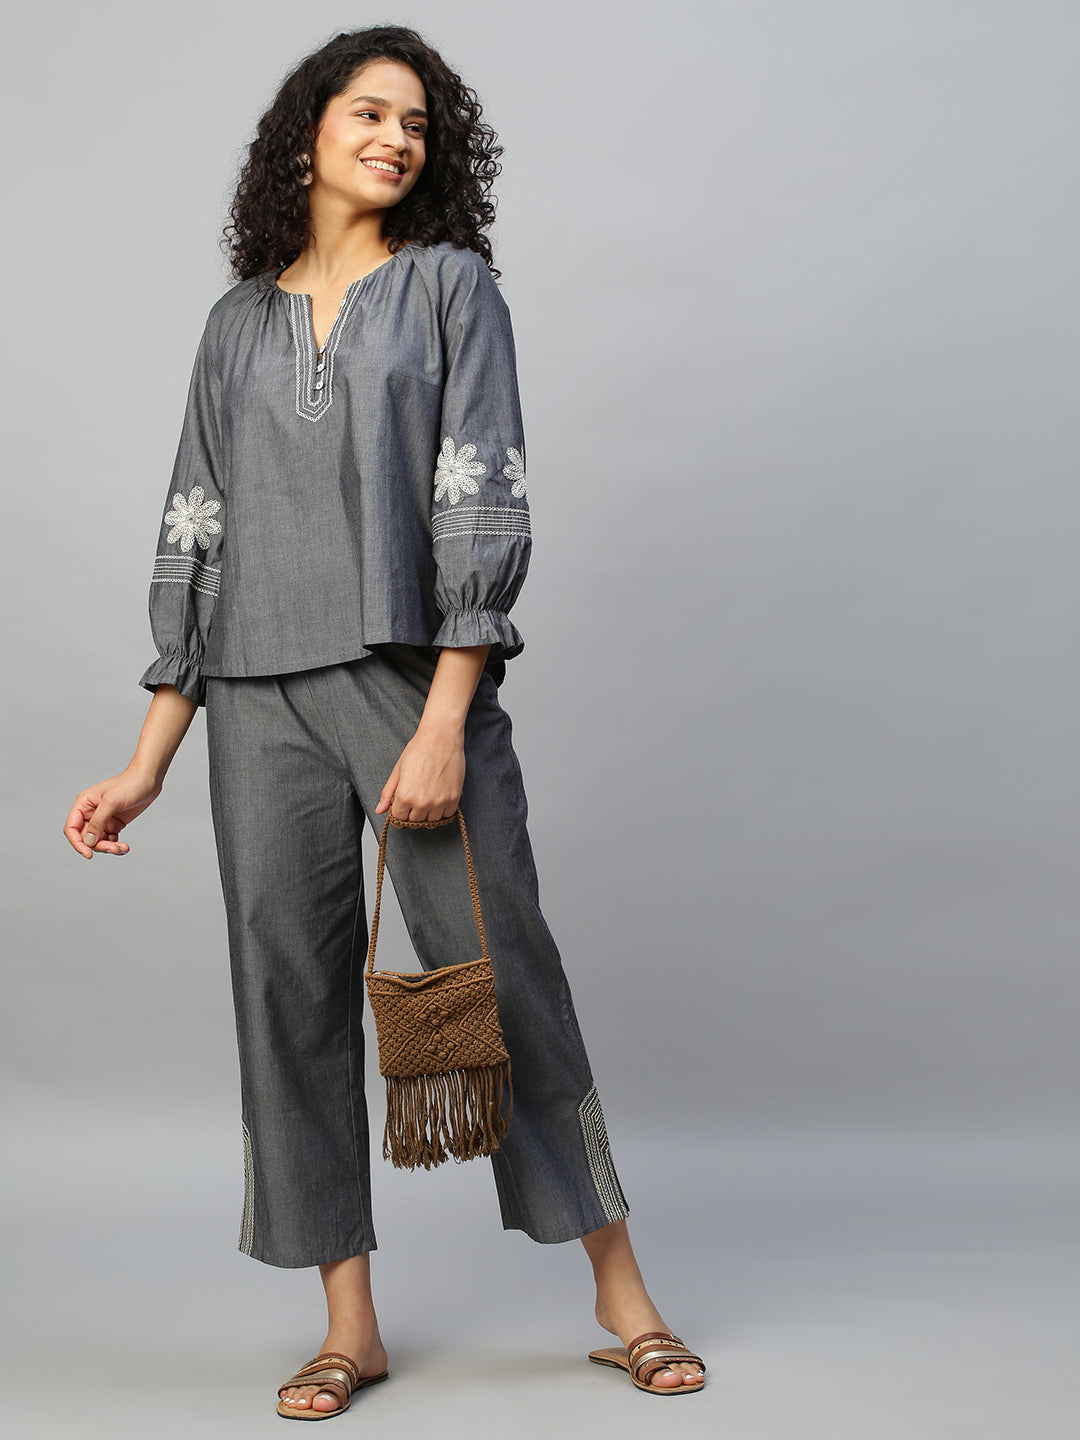 Charocoal Chambray Embroidered Tunic Top